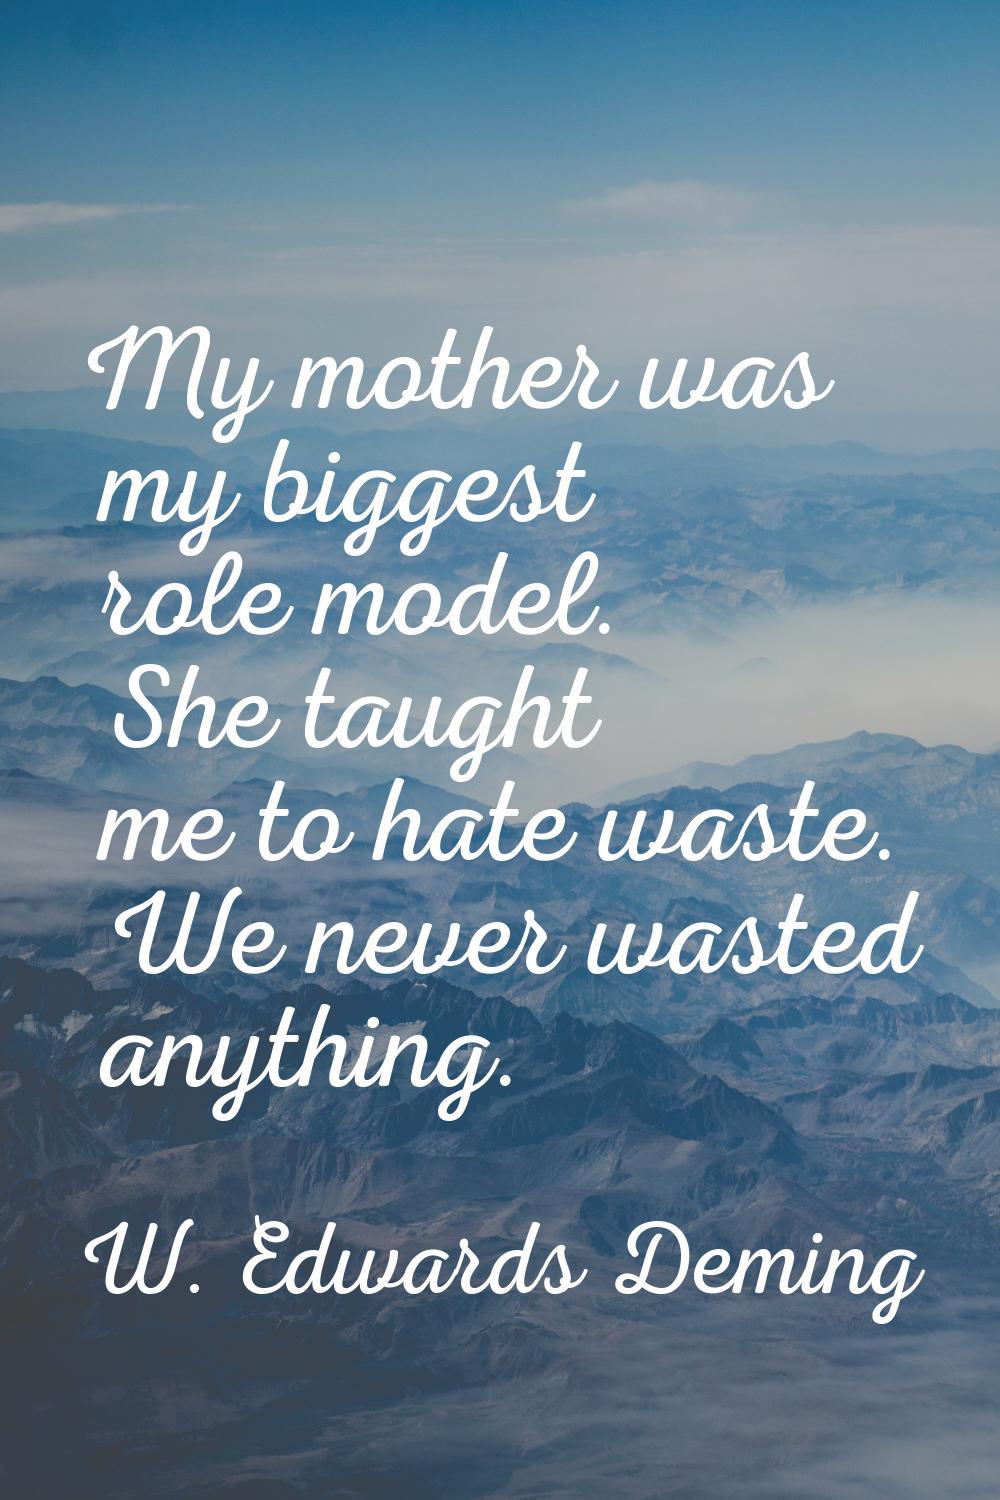 My mother was my biggest role model. She taught me to hate waste. We never wasted anything.